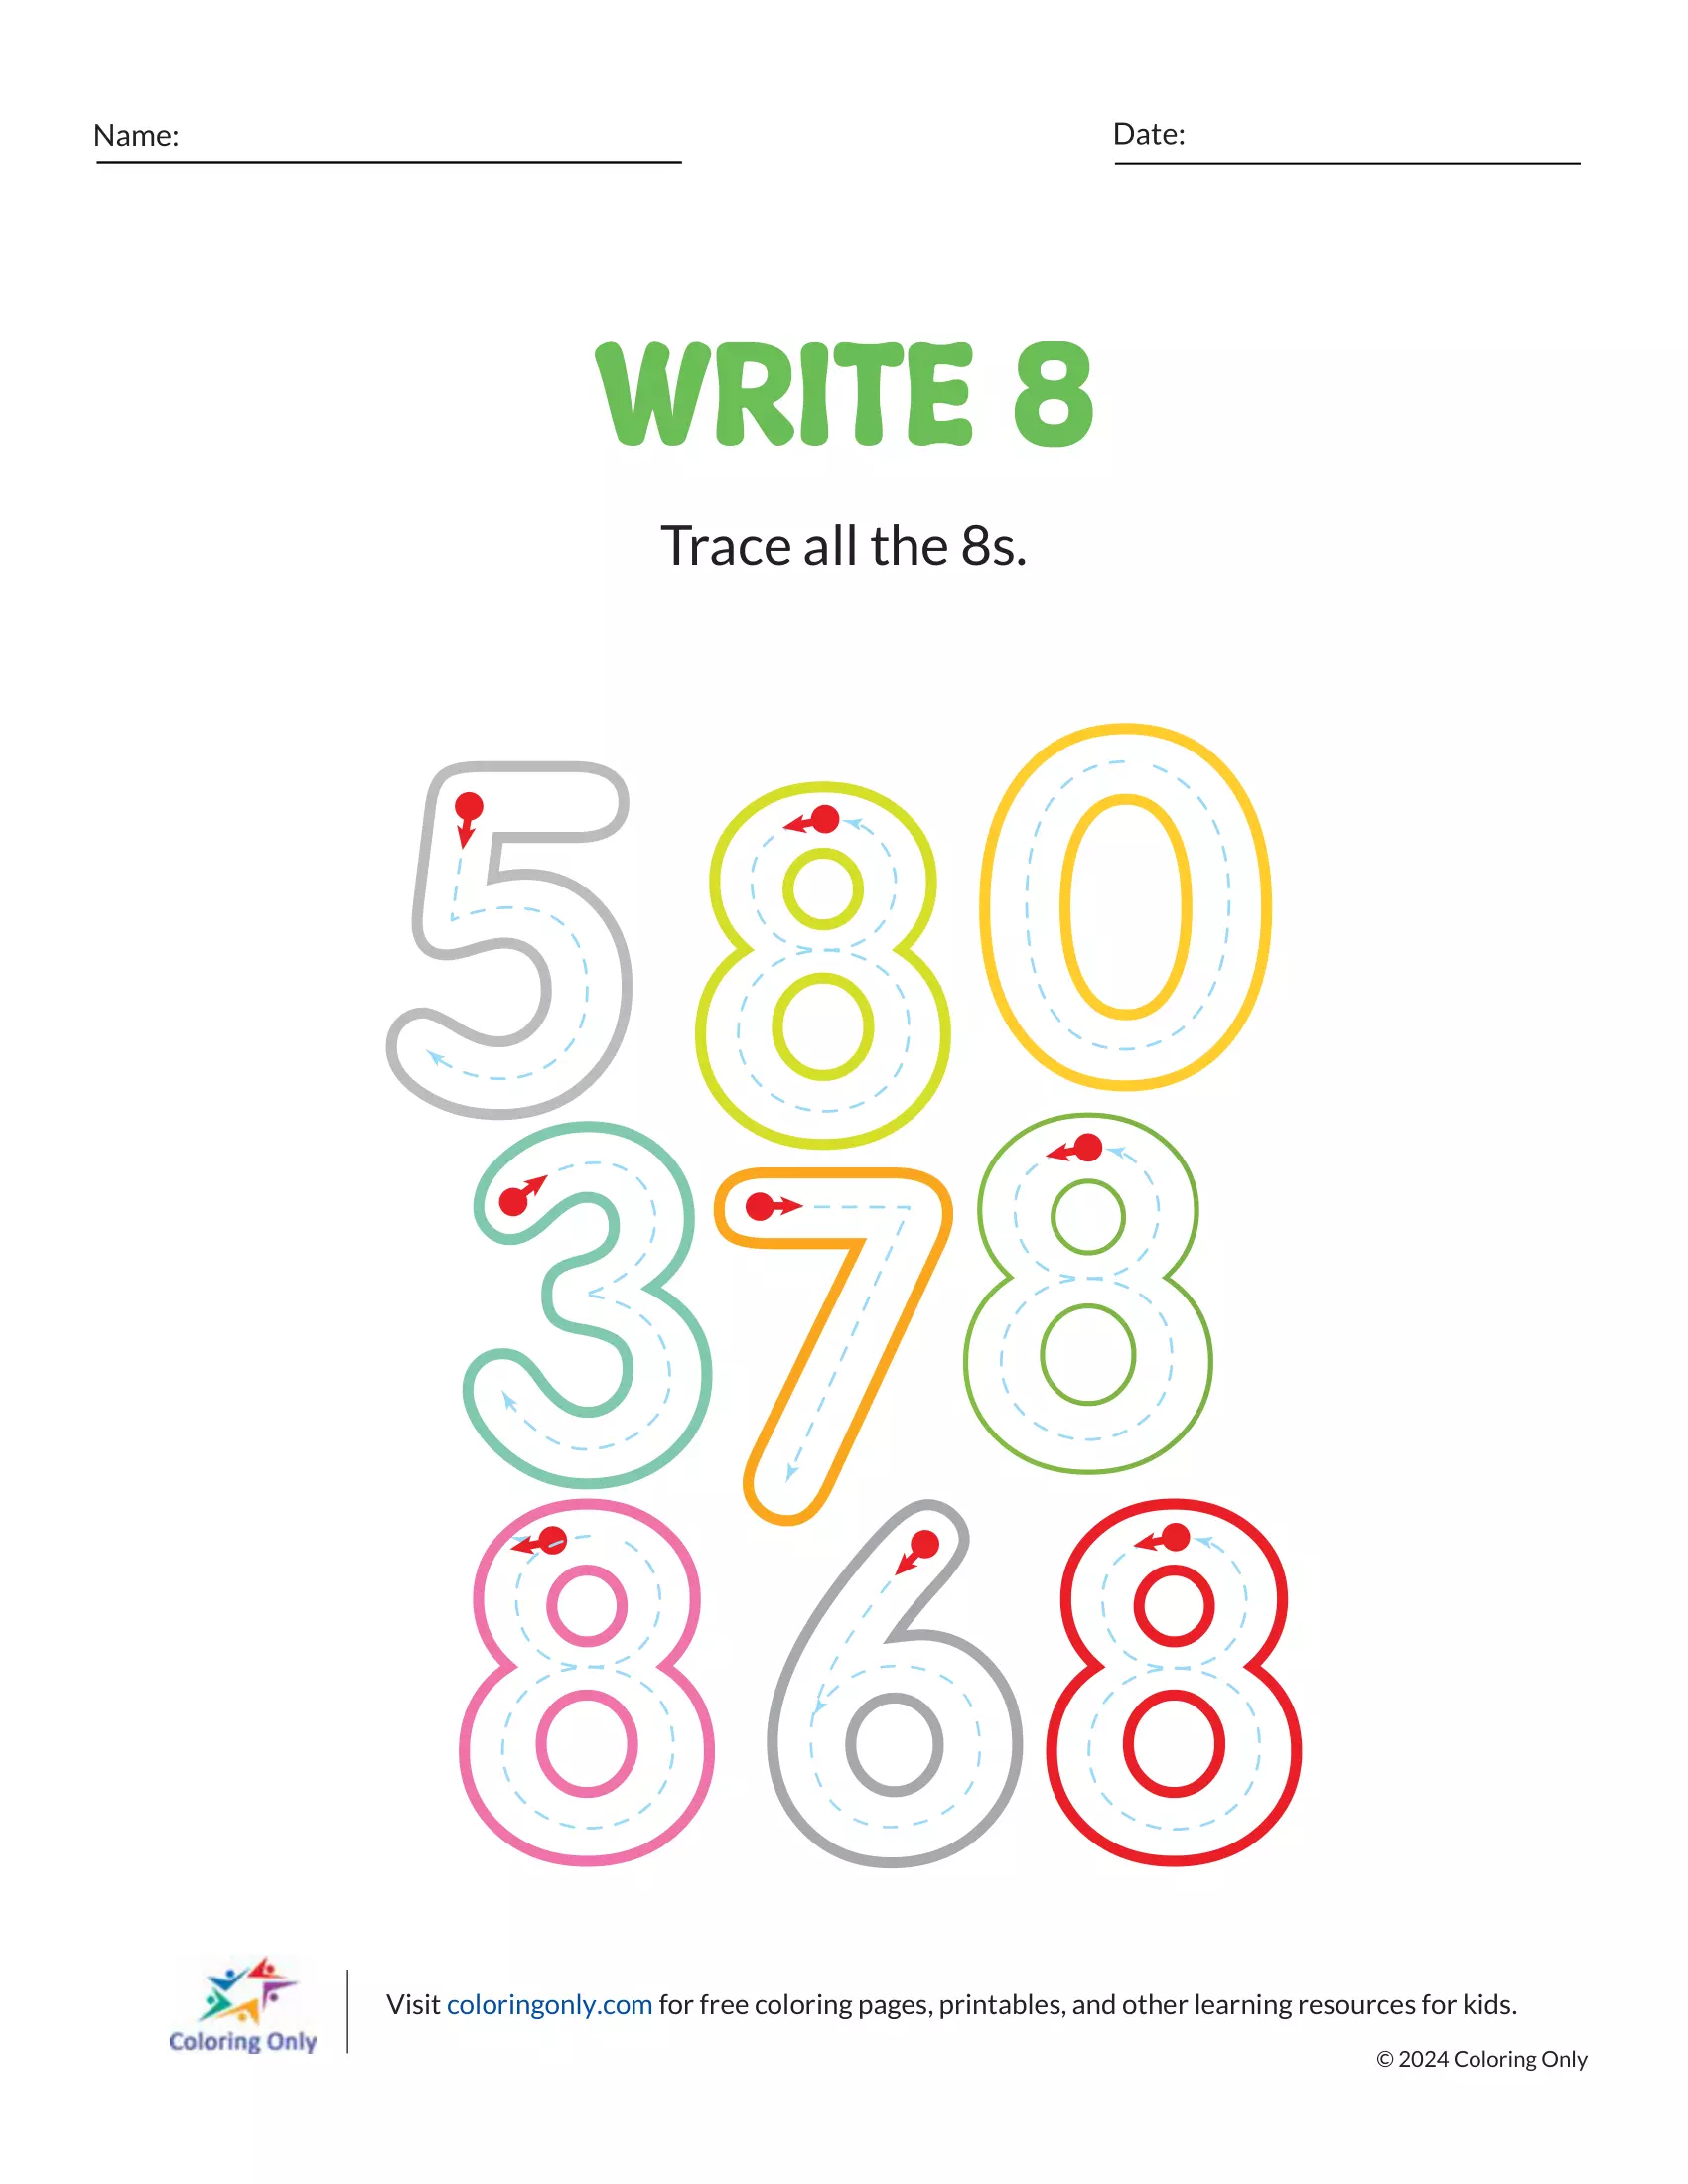 Perfect your preschooler's numeral recognition with our free printable worksheet, focused on tracing and writing the number 8.